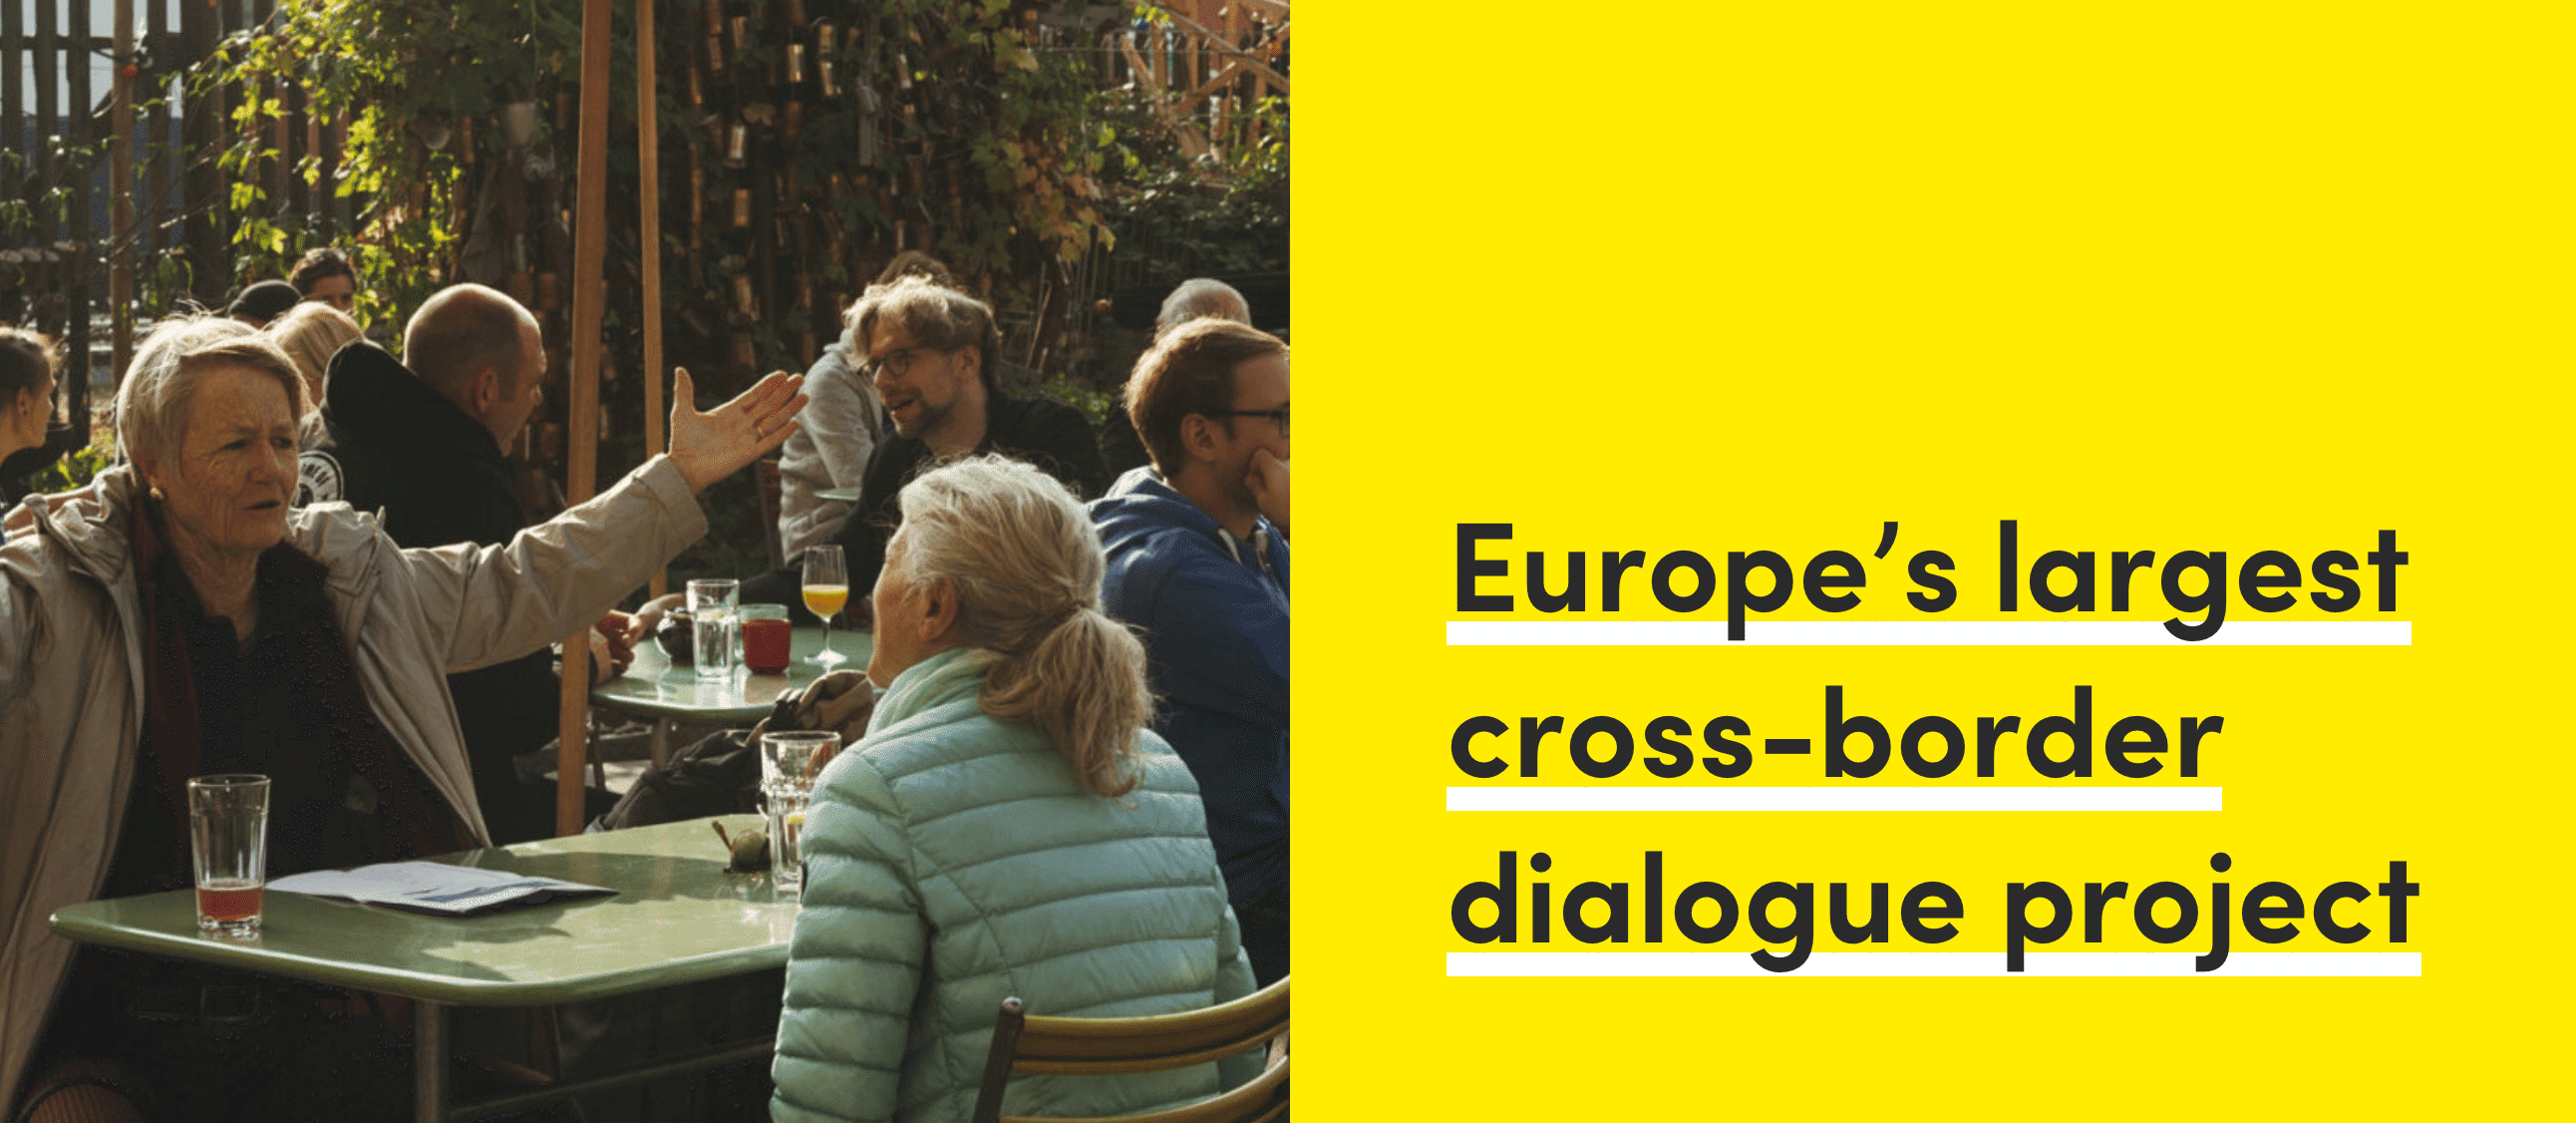 A banner showing a photo of people in conversation, with the headline “Europe’s largest cross-border dialogue project” next to it